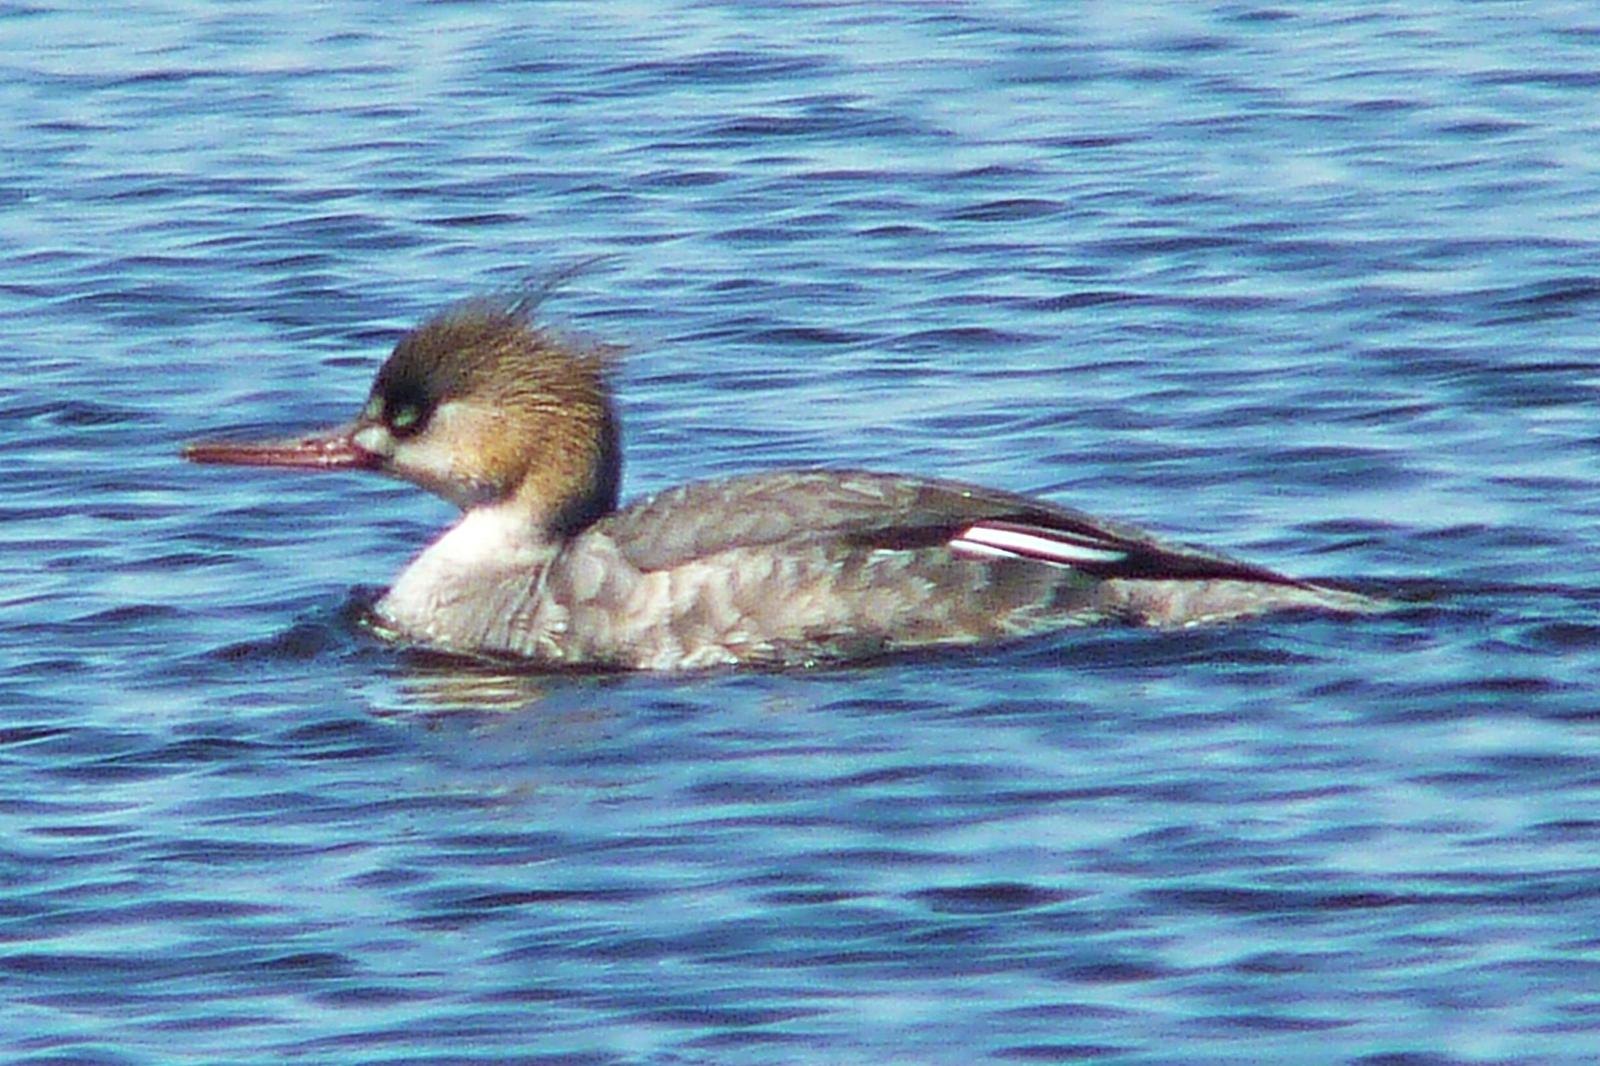 Red-breasted Merganser Photo by Bob Neugebauer